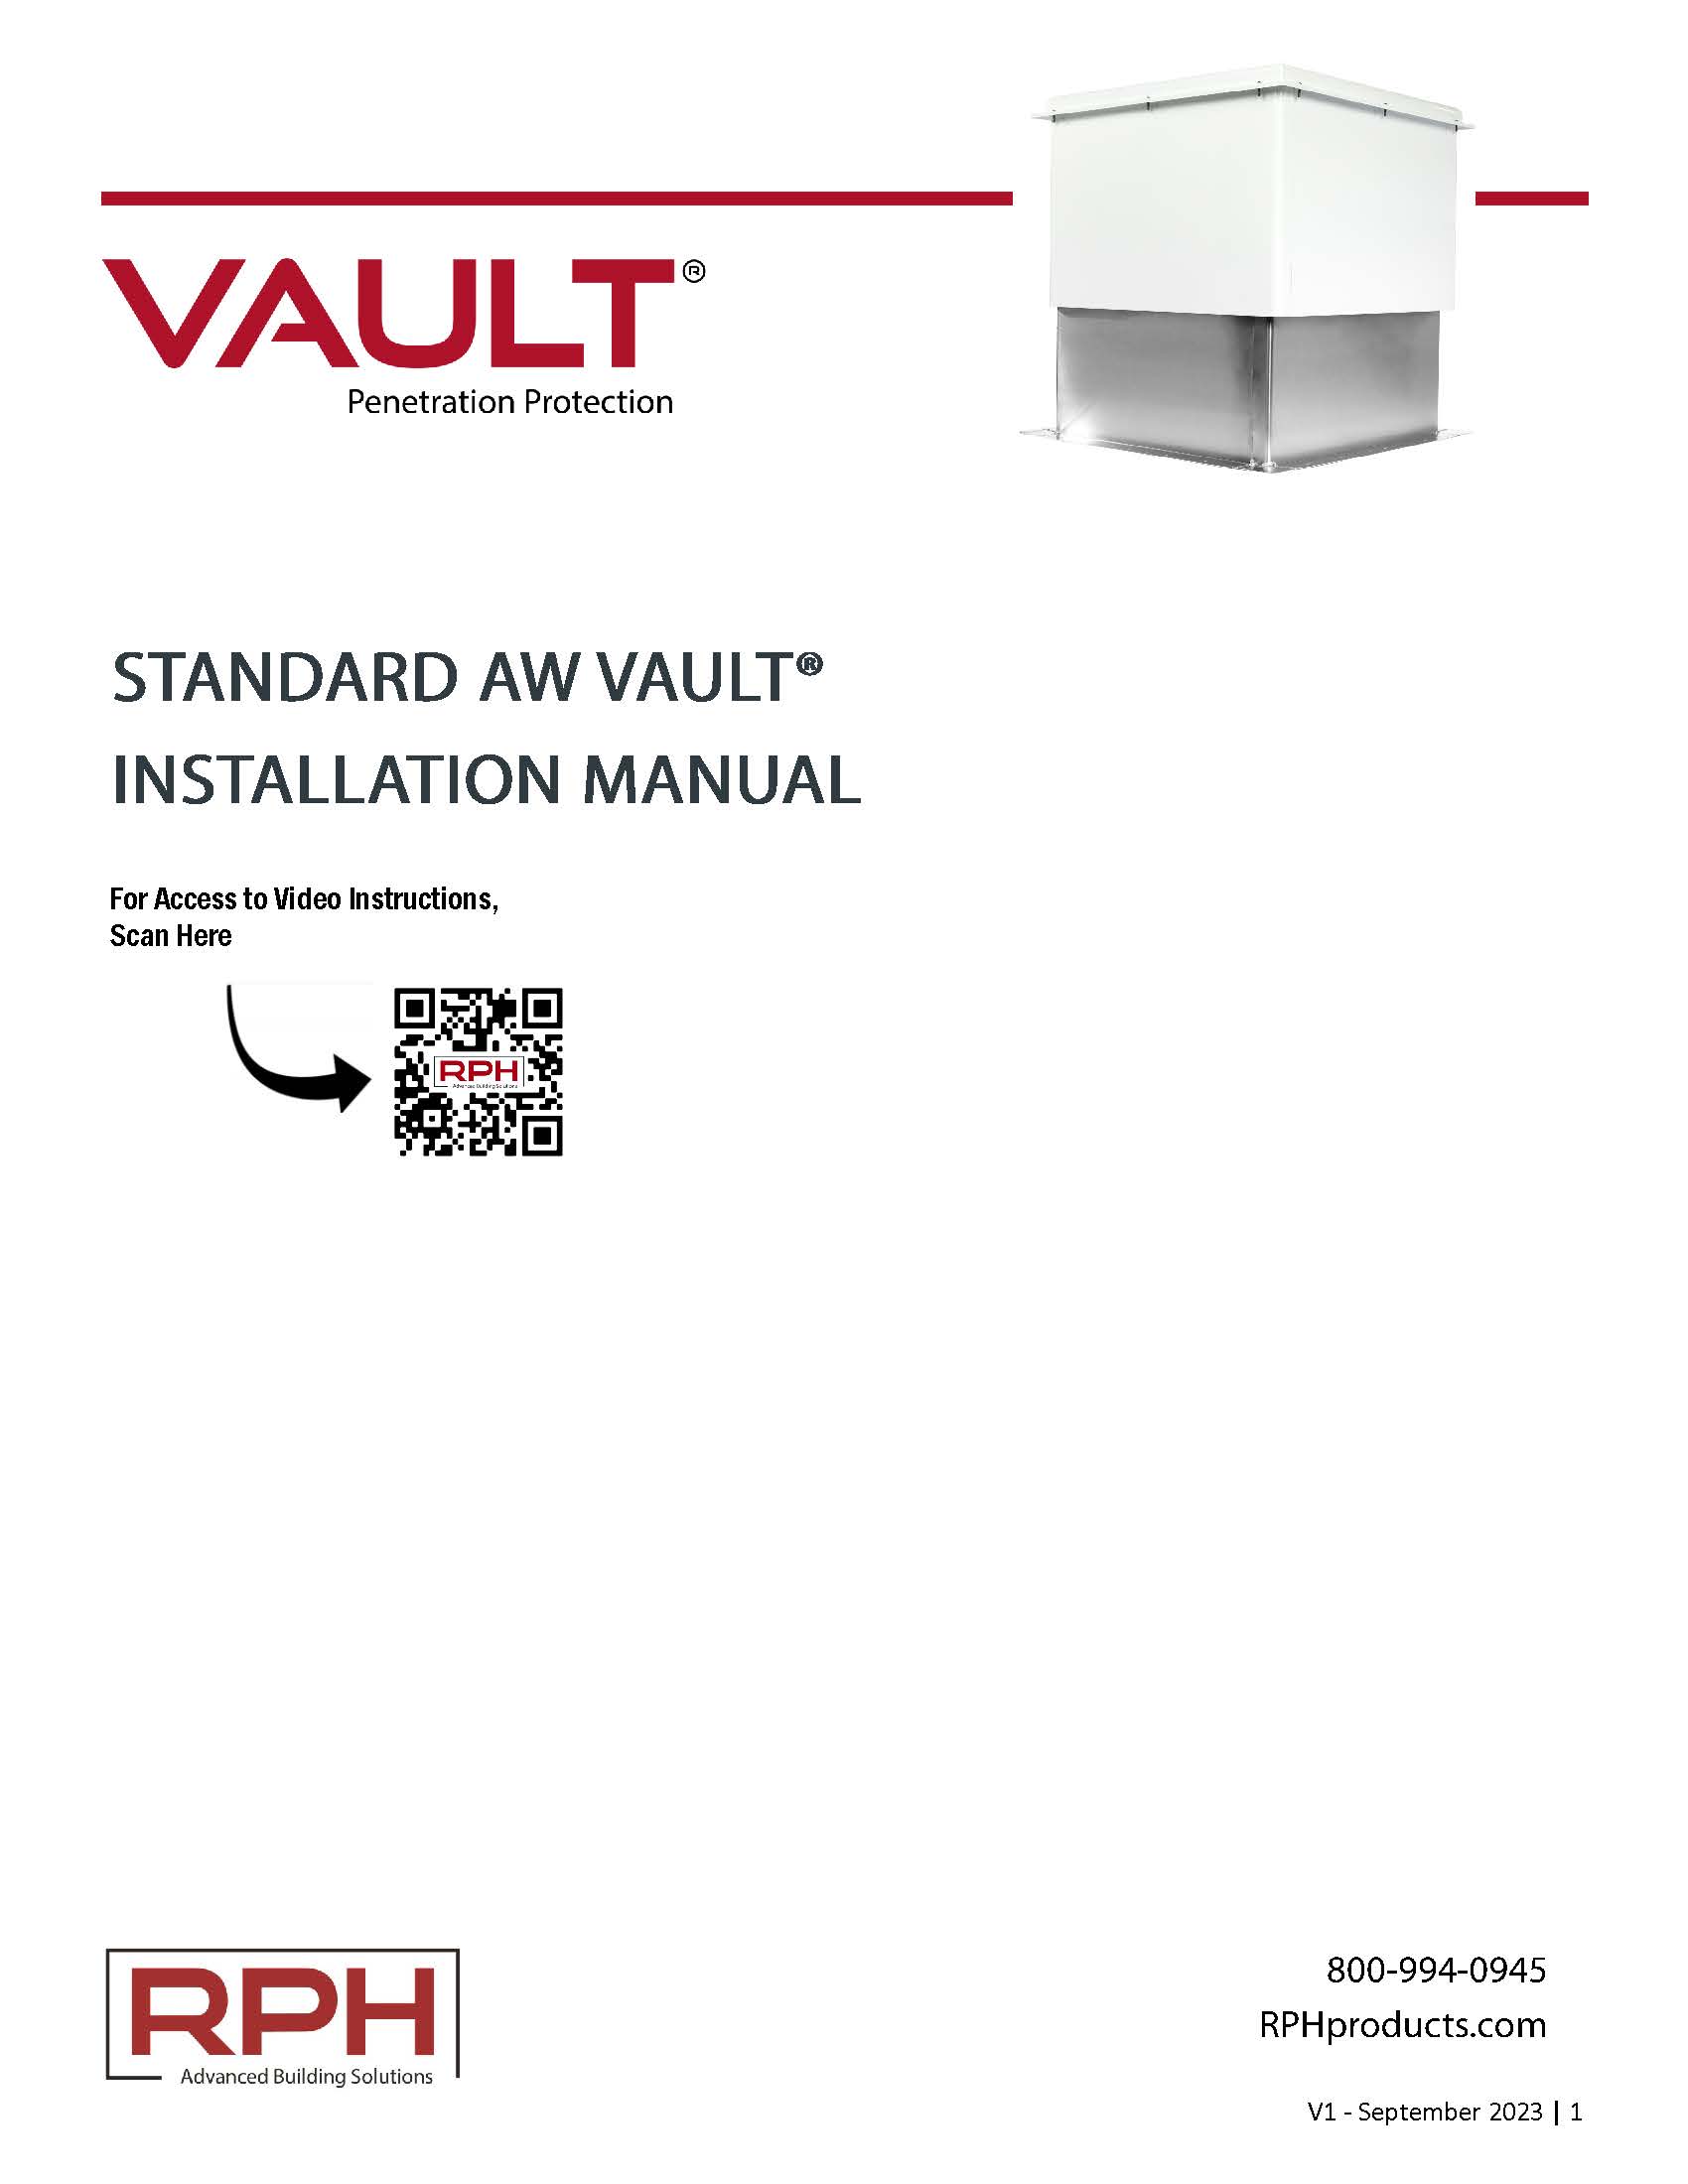 STANDARD AW VAULT INSTALLATION MANUAL_Page_01